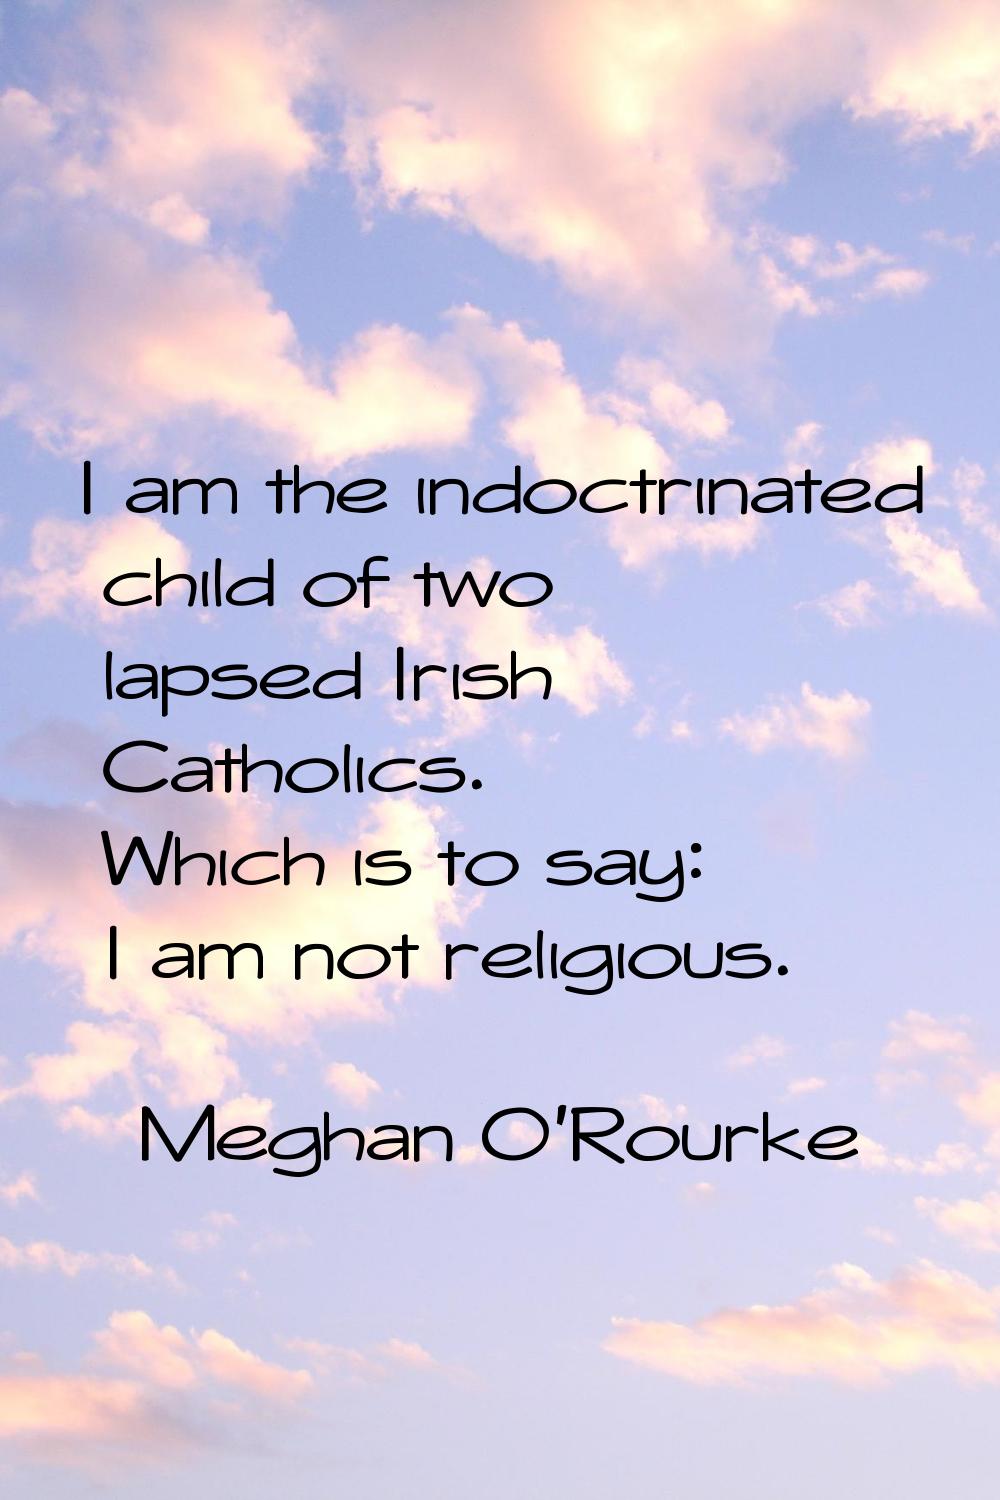 I am the indoctrinated child of two lapsed Irish Catholics. Which is to say: I am not religious.